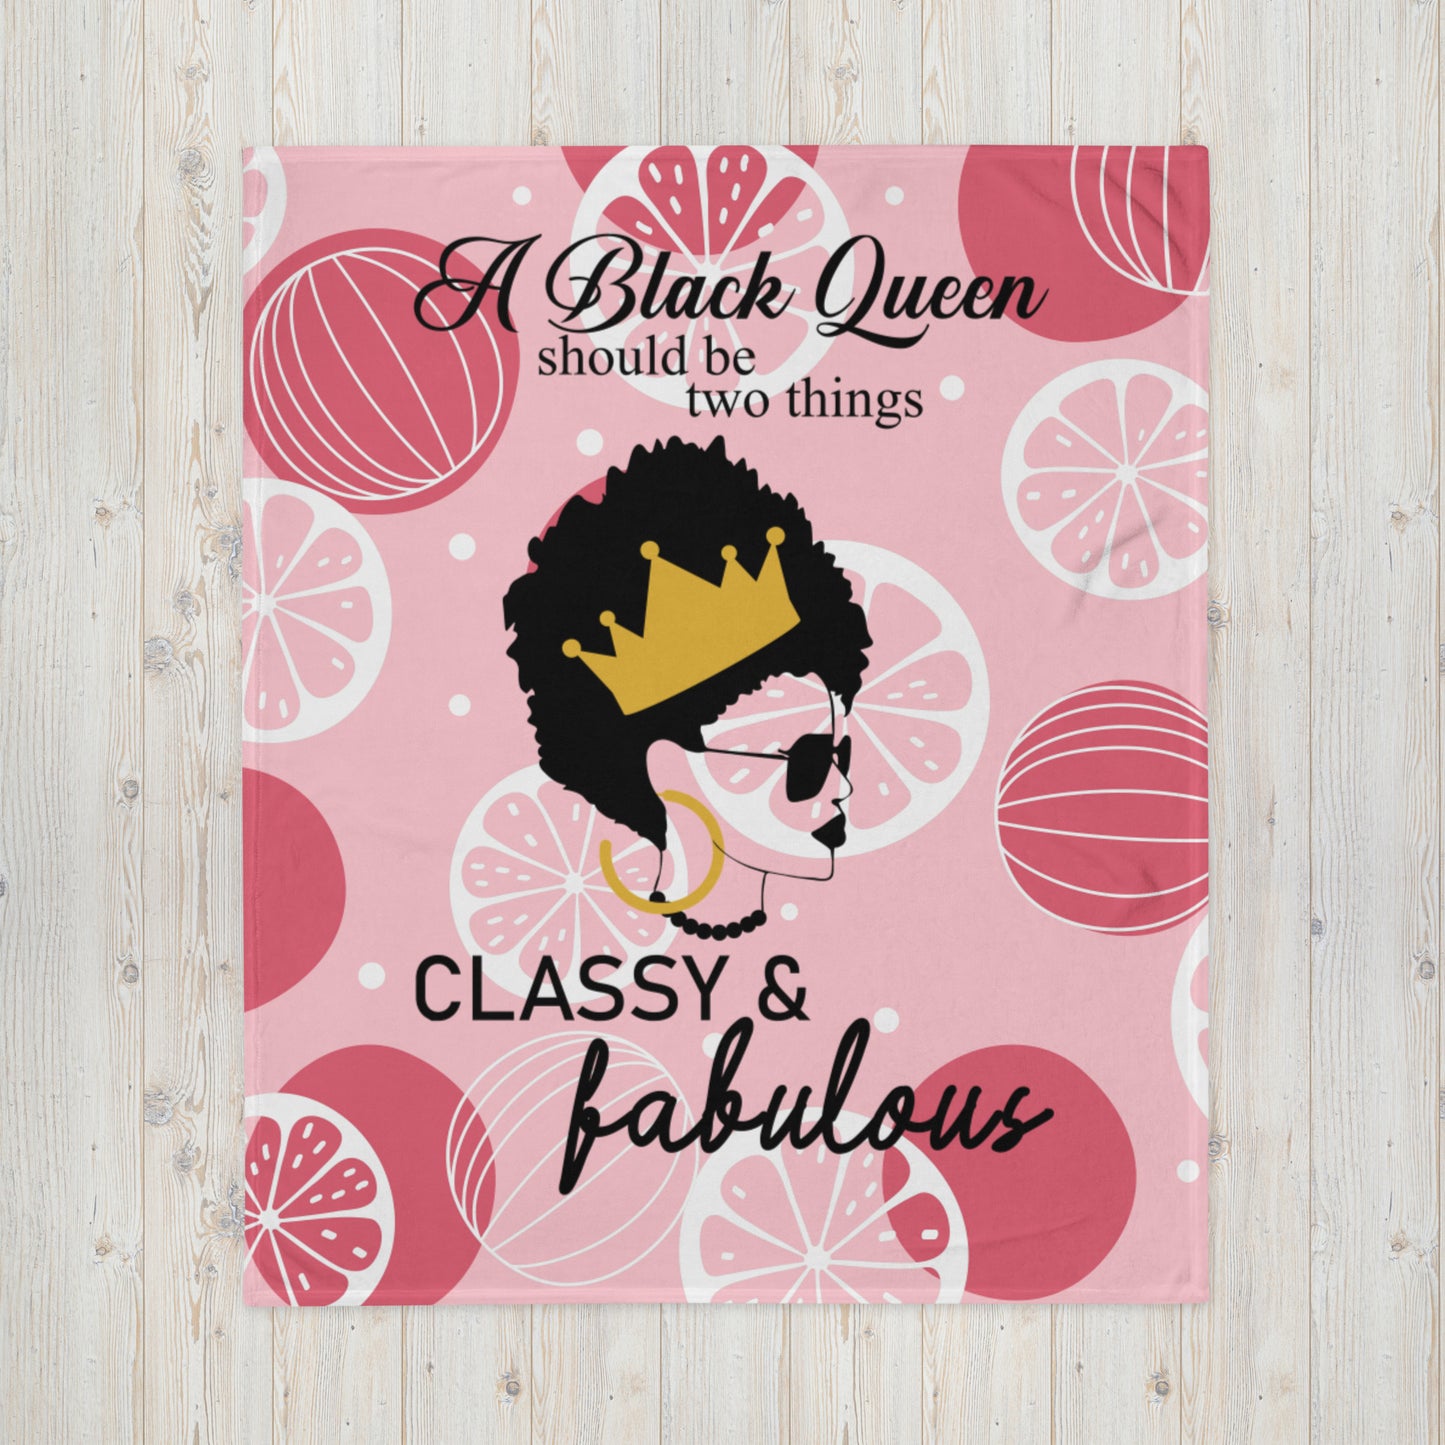 FABULOUS AND CLASSY BLACK QUEEN- Throw Blanket